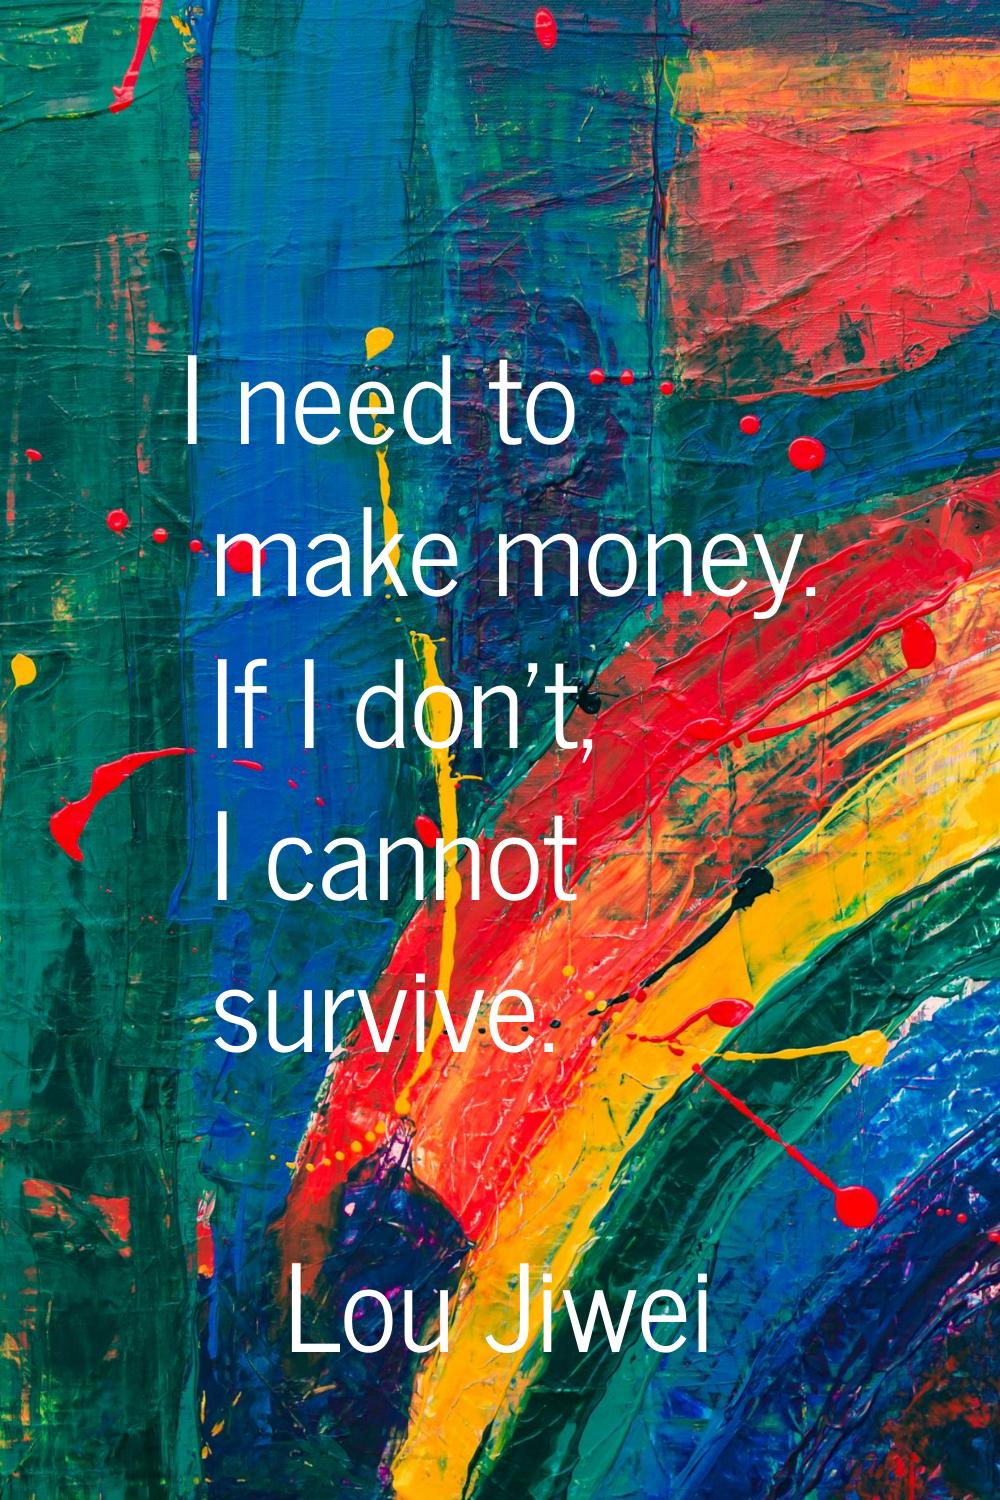 I need to make money. If I don't, I cannot survive.